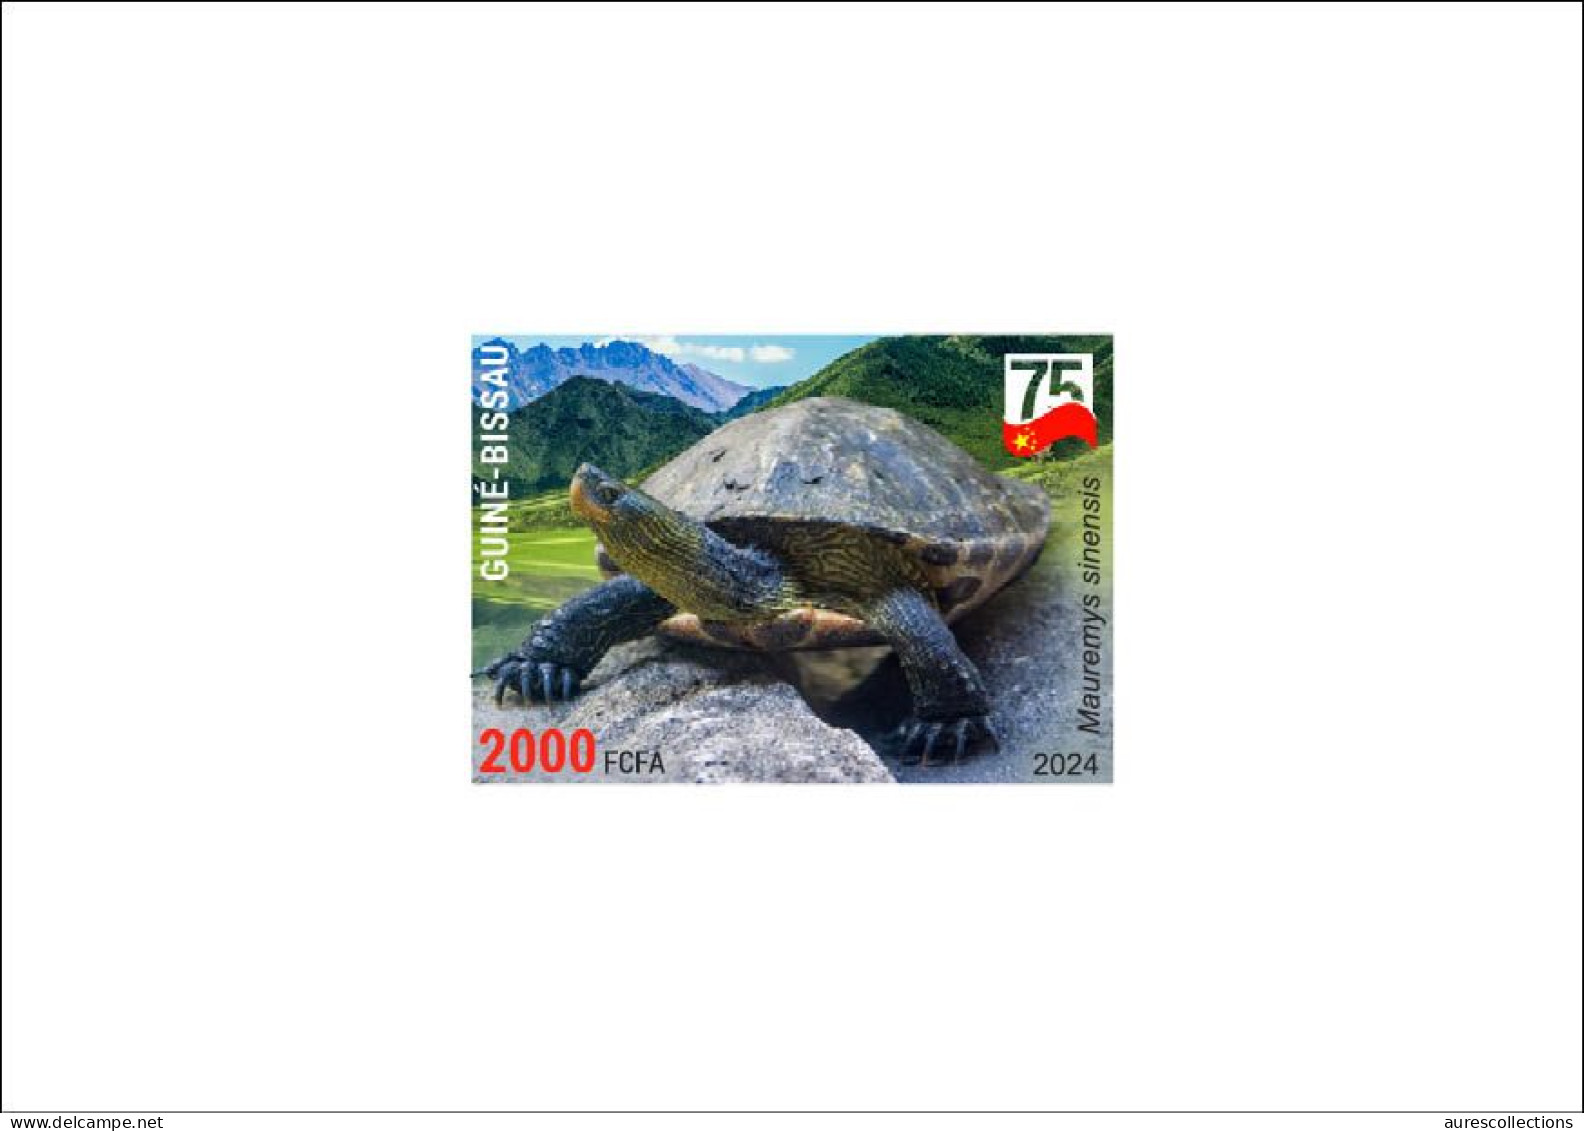 GUINEA BISSAU 2024 DELUXE PROOF - CHINA AMPHIBIANS & REPTILES - CHINESE STRIPE-NECKED TURTLE TURTLES - CHINA 75 ANNIV. - Schildpadden